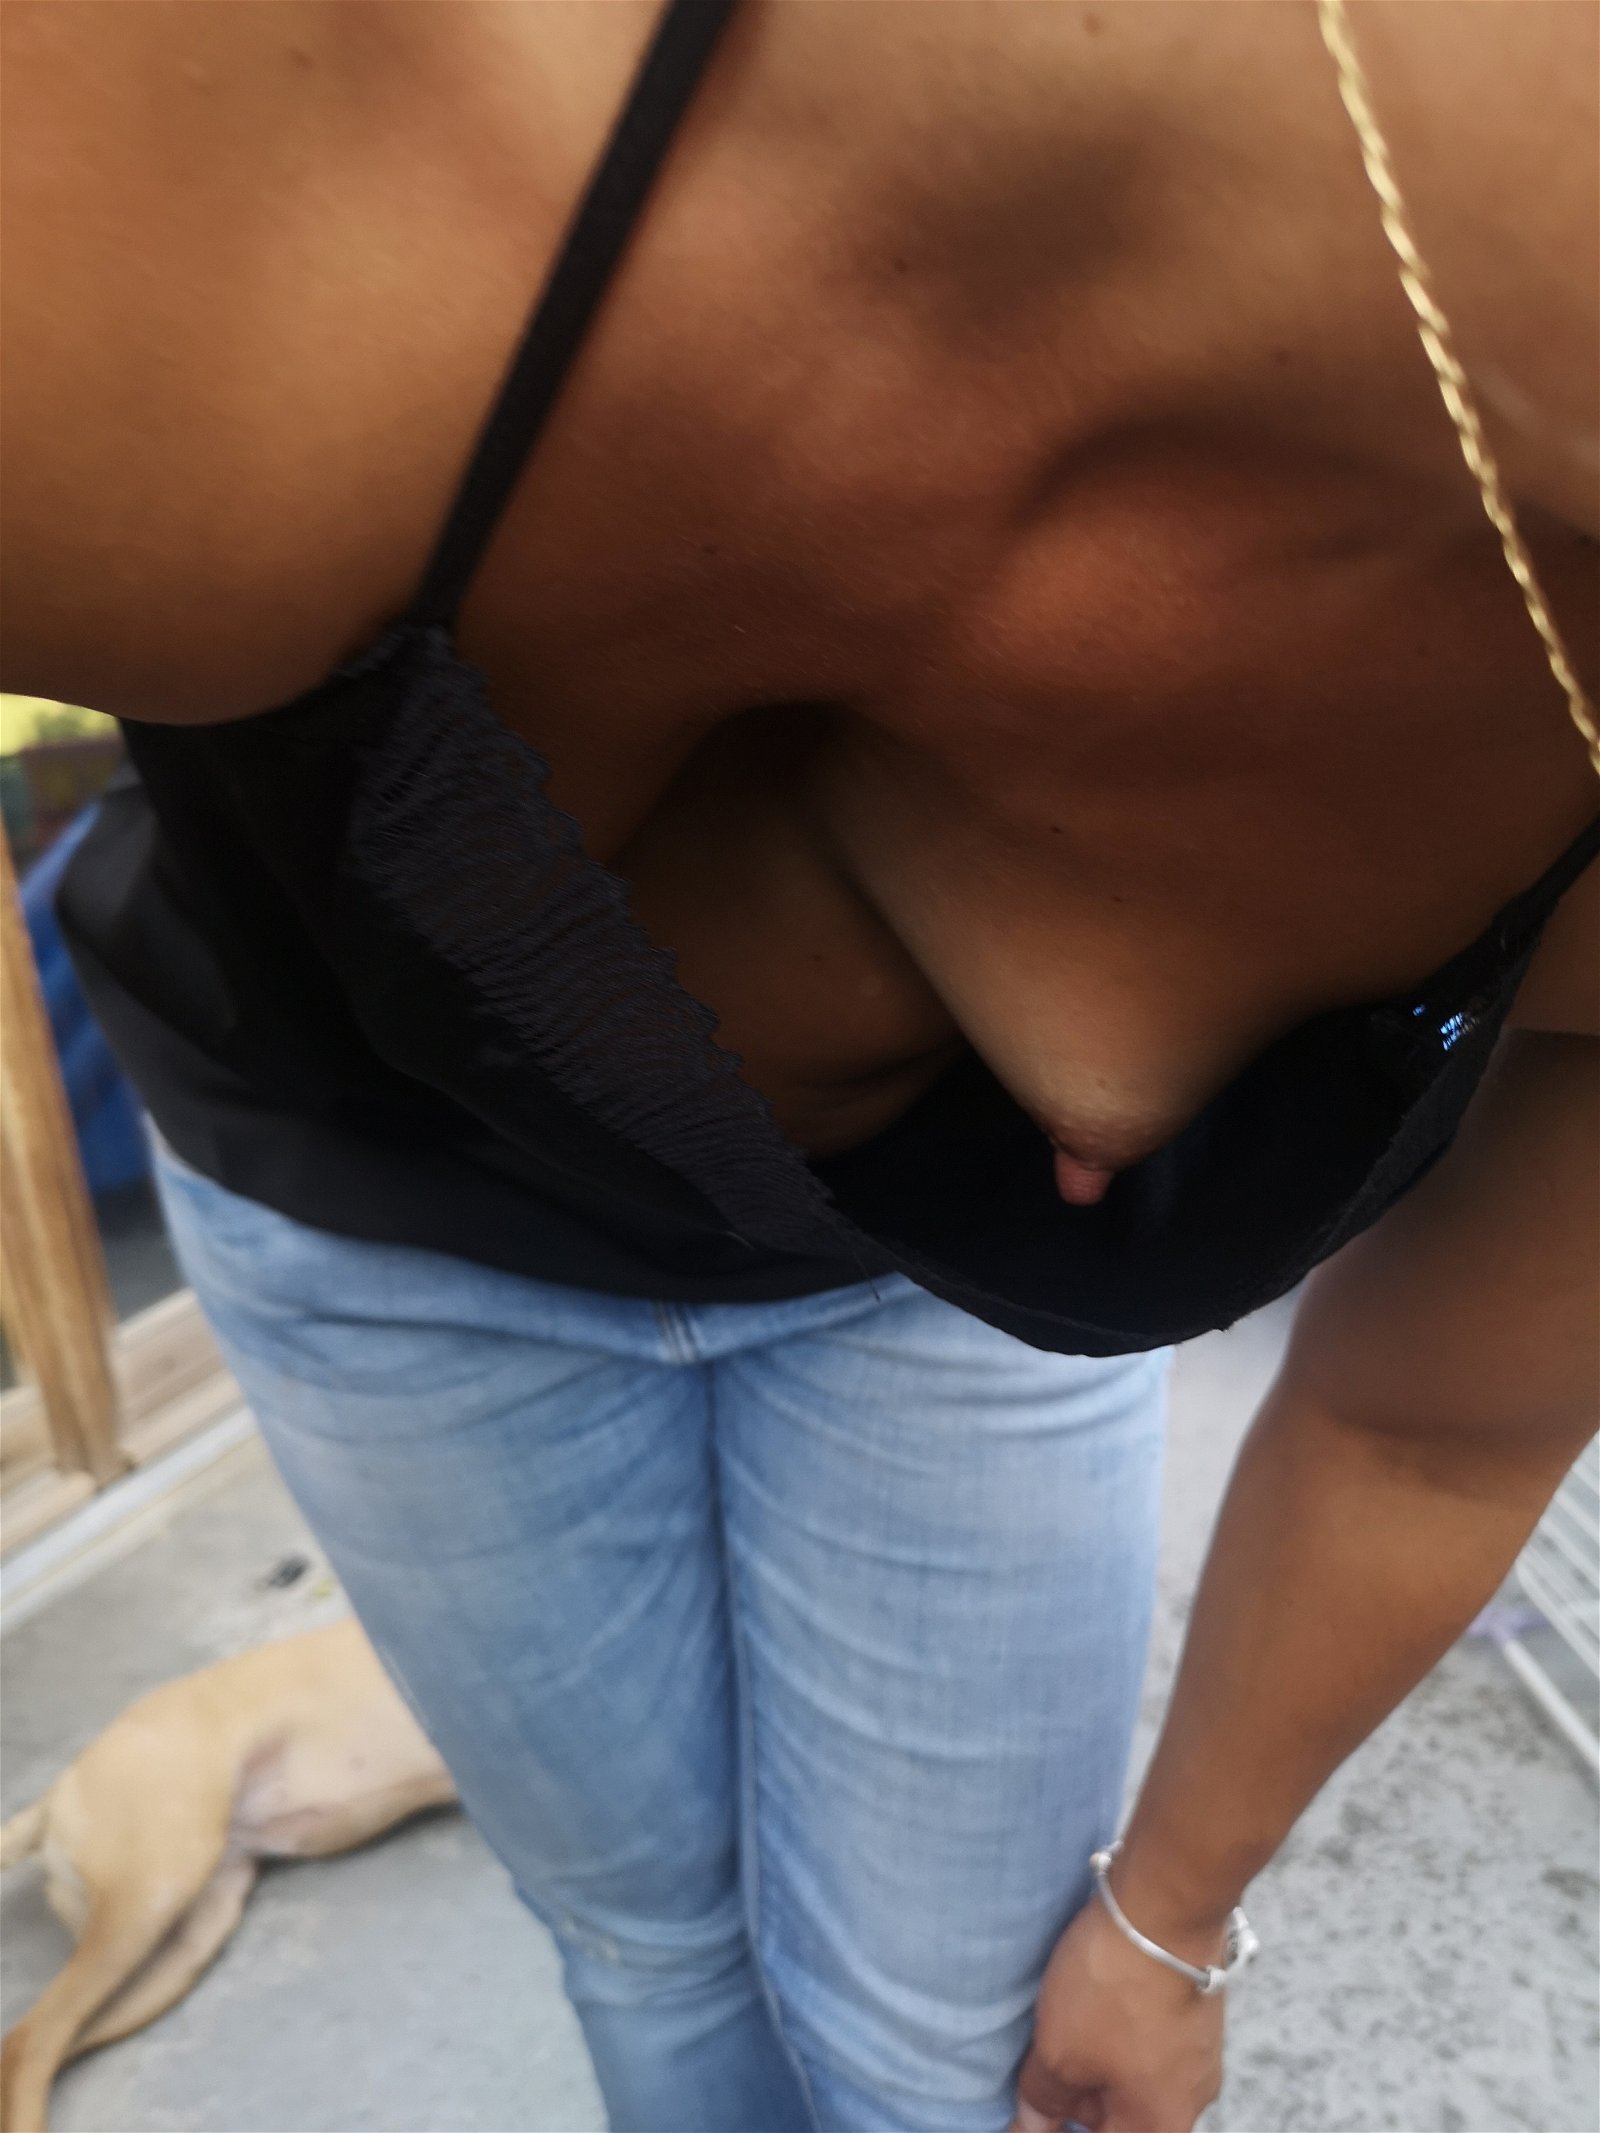 Photo by Checkout42 with the username @Checkout42,  August 15, 2020 at 6:08 AM. The post is about the topic Flashers and Public Nudes and the text says 'My lovely wife's boobs... 😍'